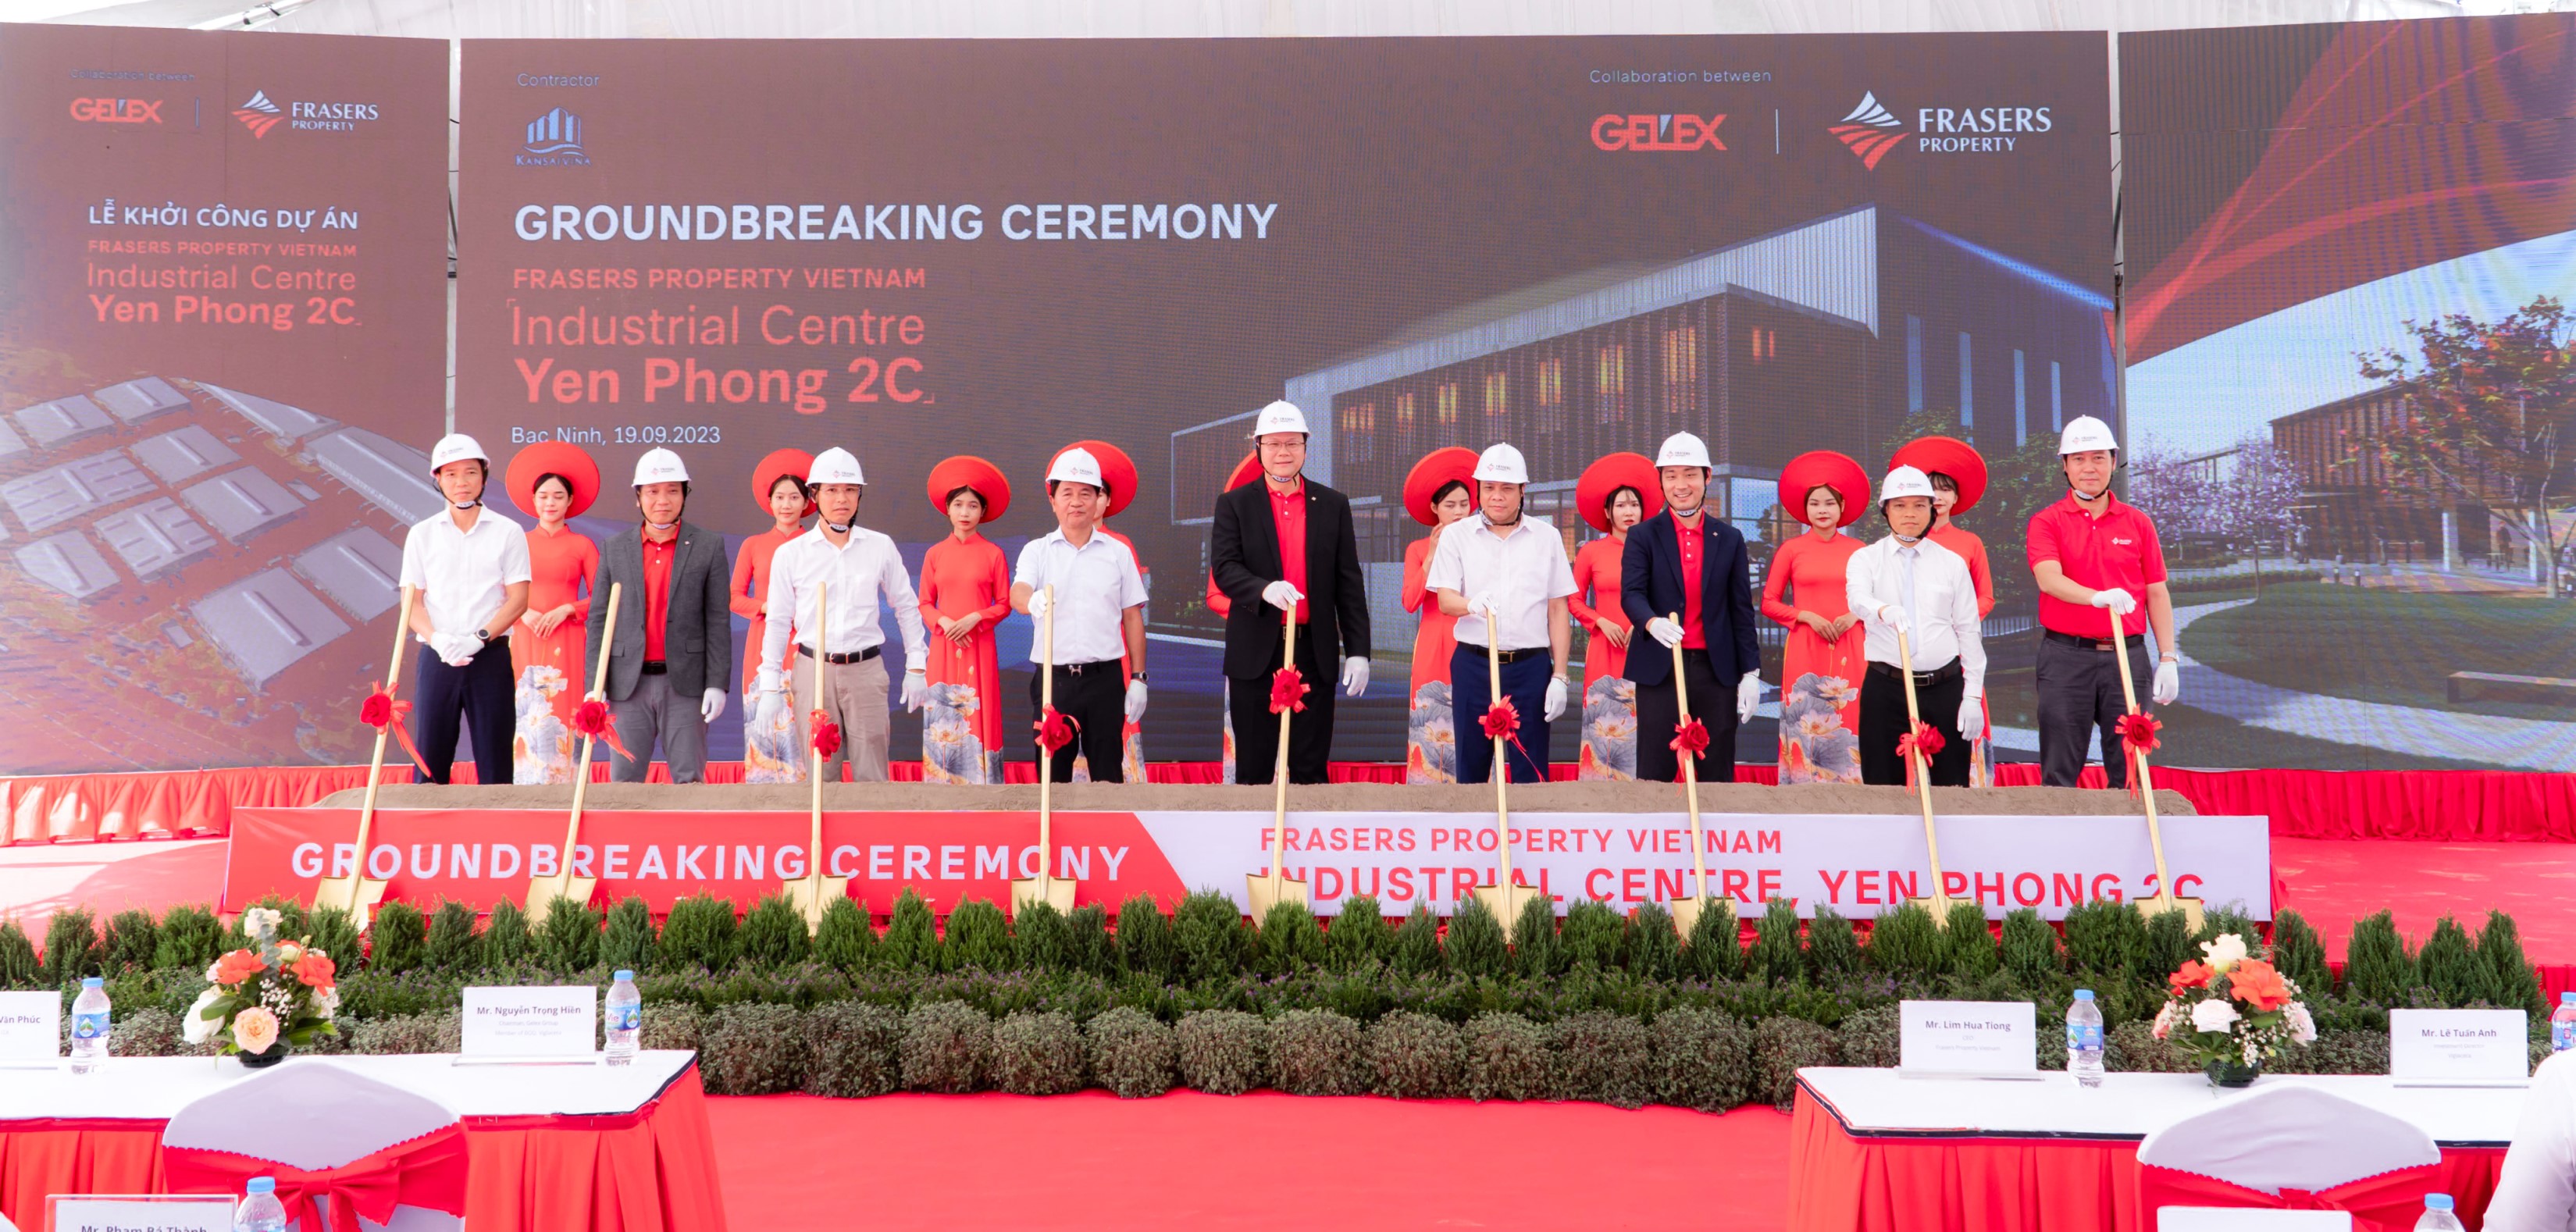 Frasers Property Vietnam and GELEX Group break ground on maiden project in Bac Ninh